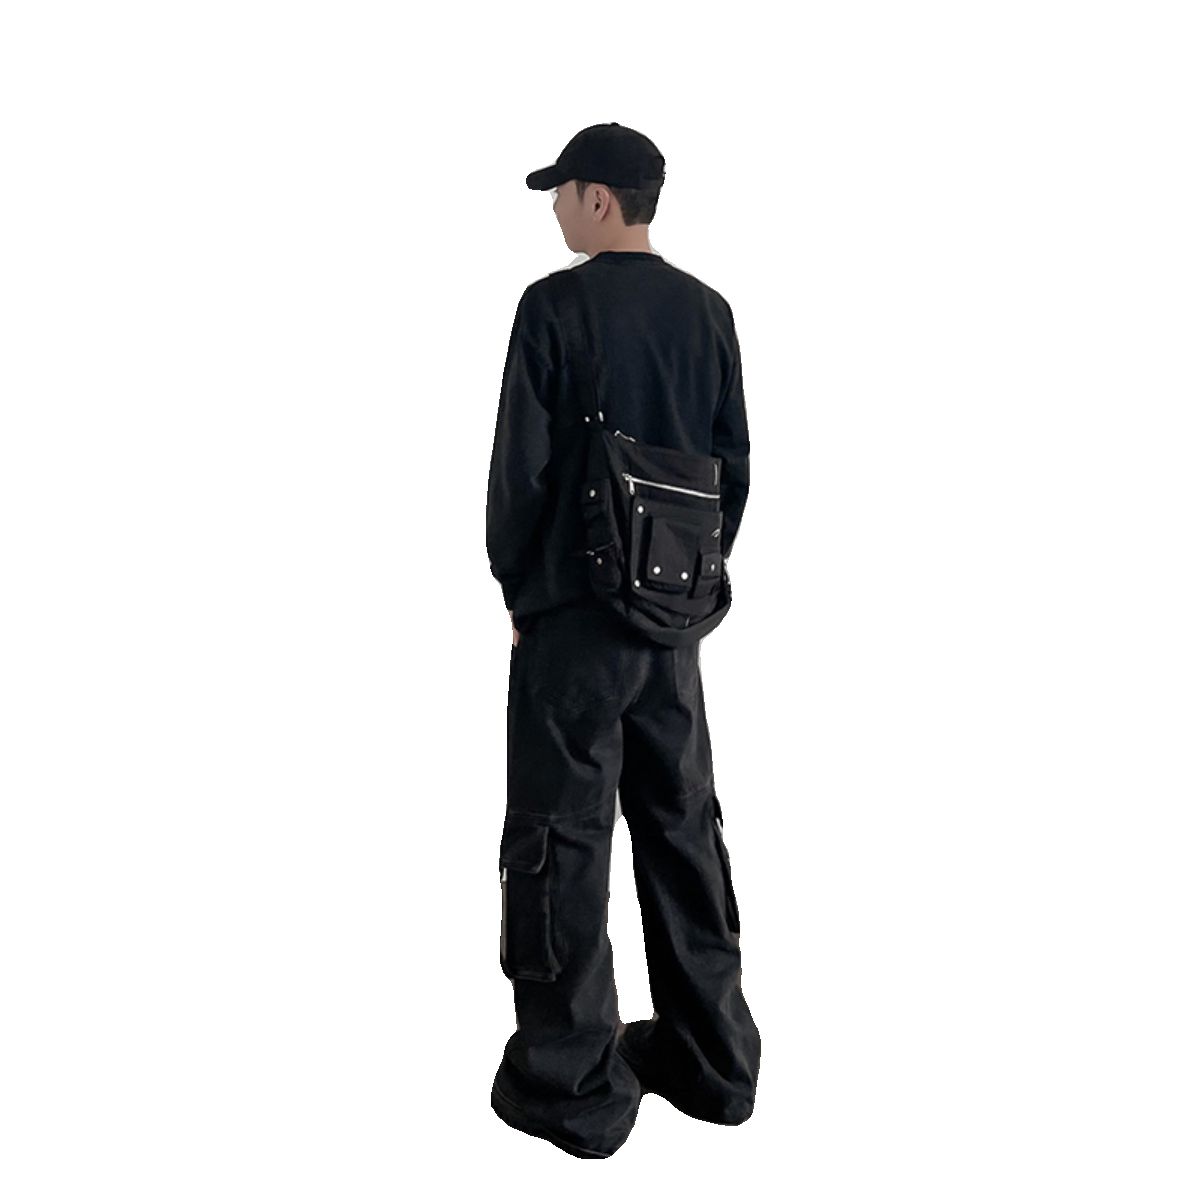 Faded Oversized Pocket Cargo Pants Korean Street Fashion Pants By A PUEE Shop Online at OH Vault